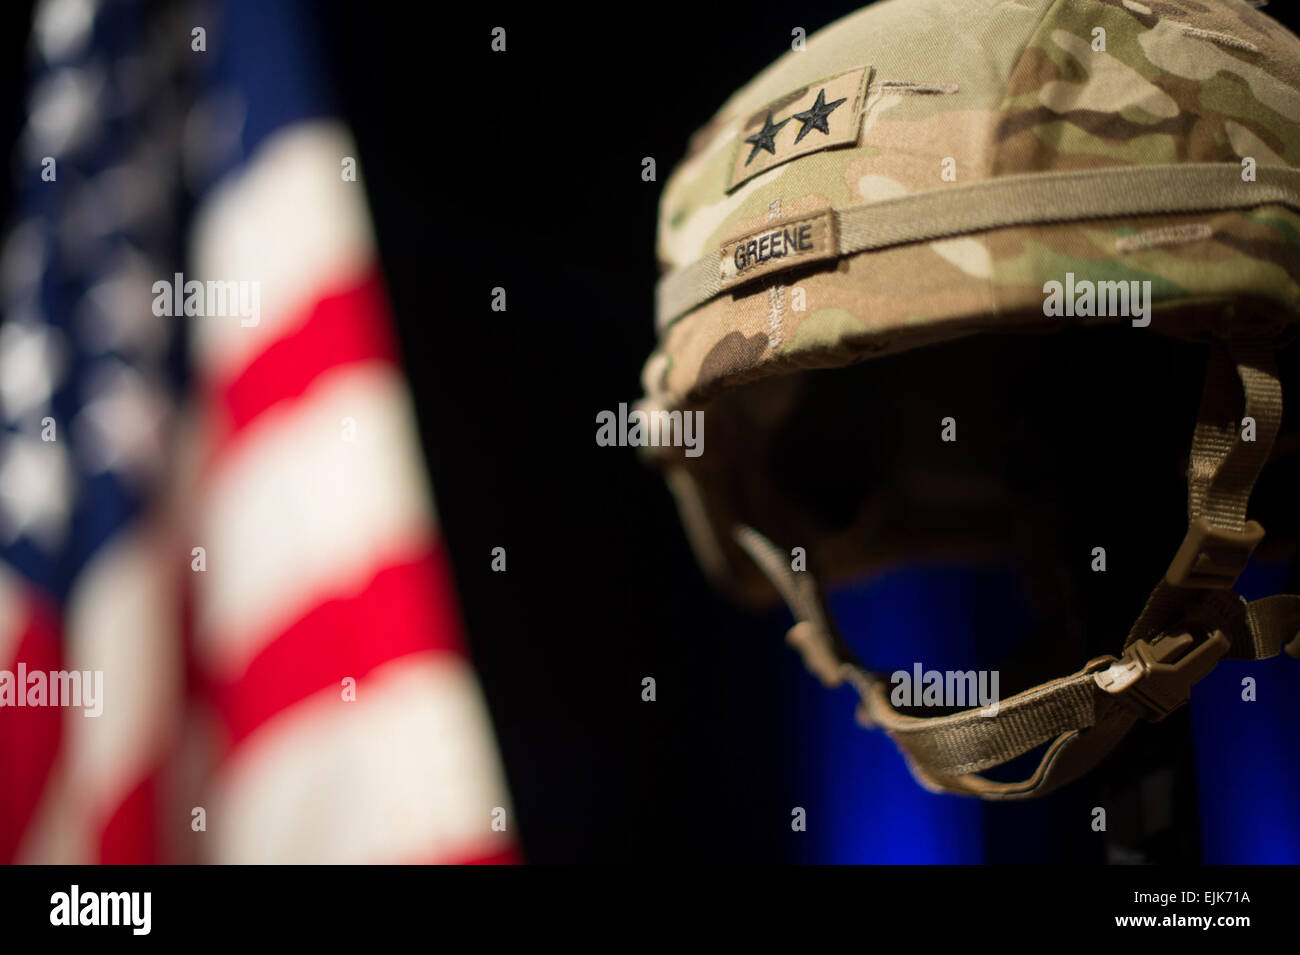 Helmet atop the Fallen Soldier Display in honor of Maj. Gen. Harold J. Greene during a memorial ceremony at the Pentagon, 13 Aug. 2014.  Greene was killed Aug. 5 in an insider attack while deployed to Afghanistan.  He will be interred at Arlington National Cemetery on 14 Aug.   Staff Sgt. Bernardo Fuller Stock Photo